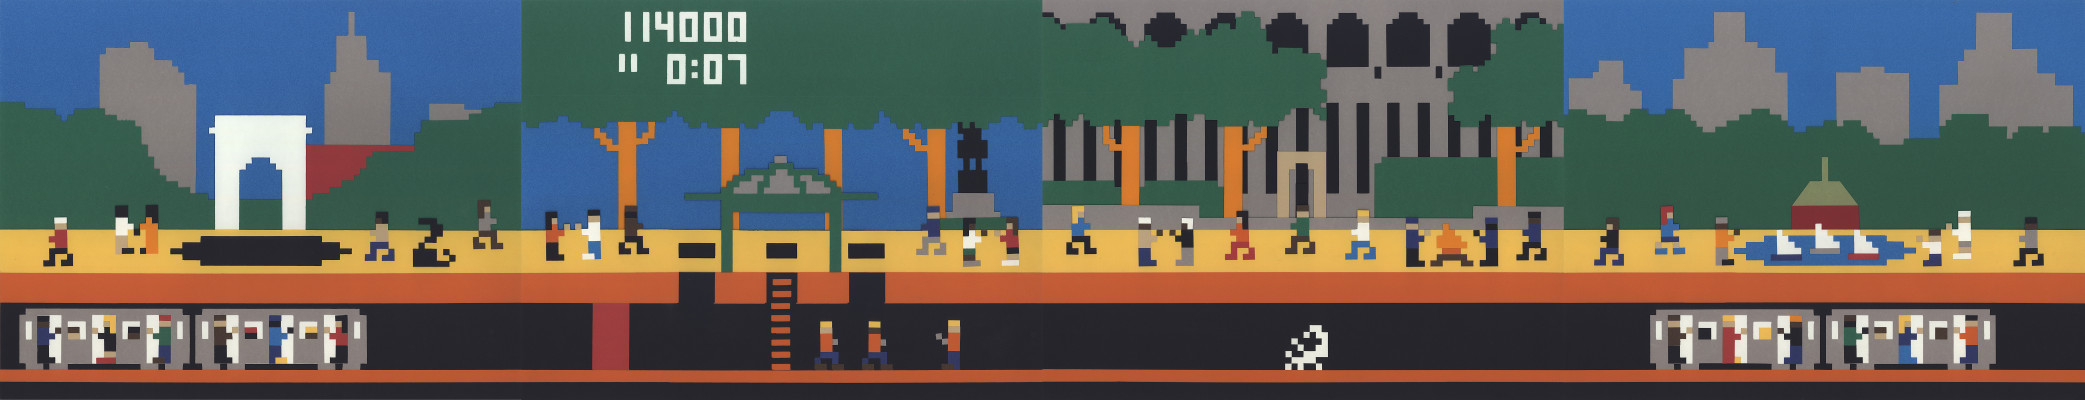 Washington Square, Union Square, Bryant and Central Parks,
                depicted as scenes from the 1980s video game, 'Pittfall!'.
                In each scene, pedestrians surround iconic landmarks, with
                subway tunnels represented below the scene.